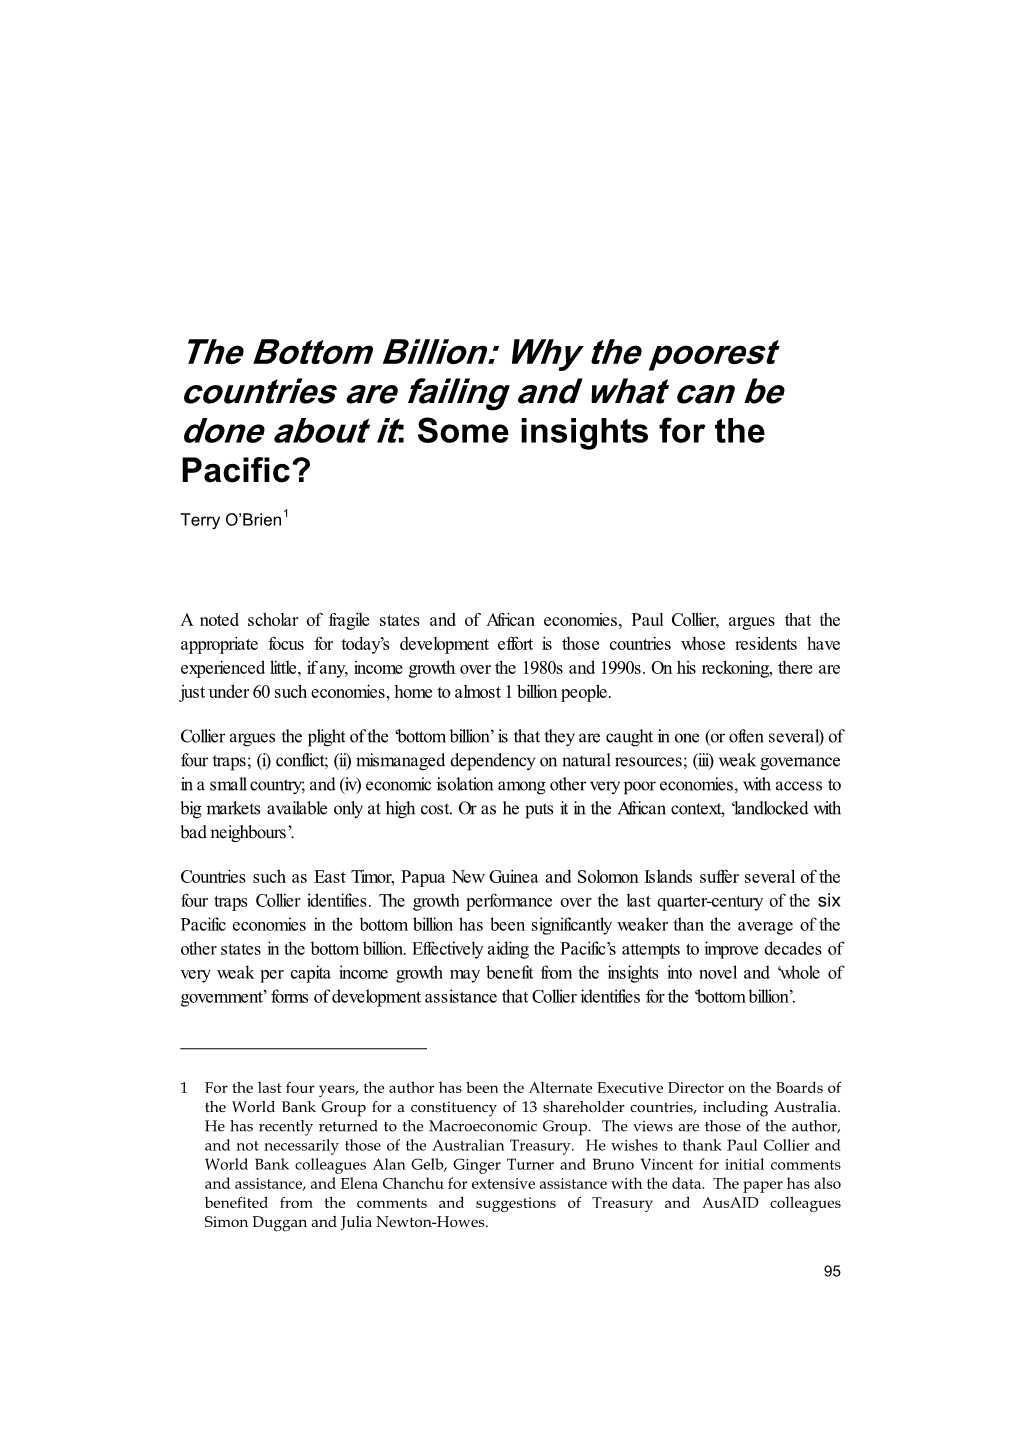 The Bottom Billion: Why the Poorest Countries Are Failing and What Can Be Done About It: Some Insights for the Pacific?